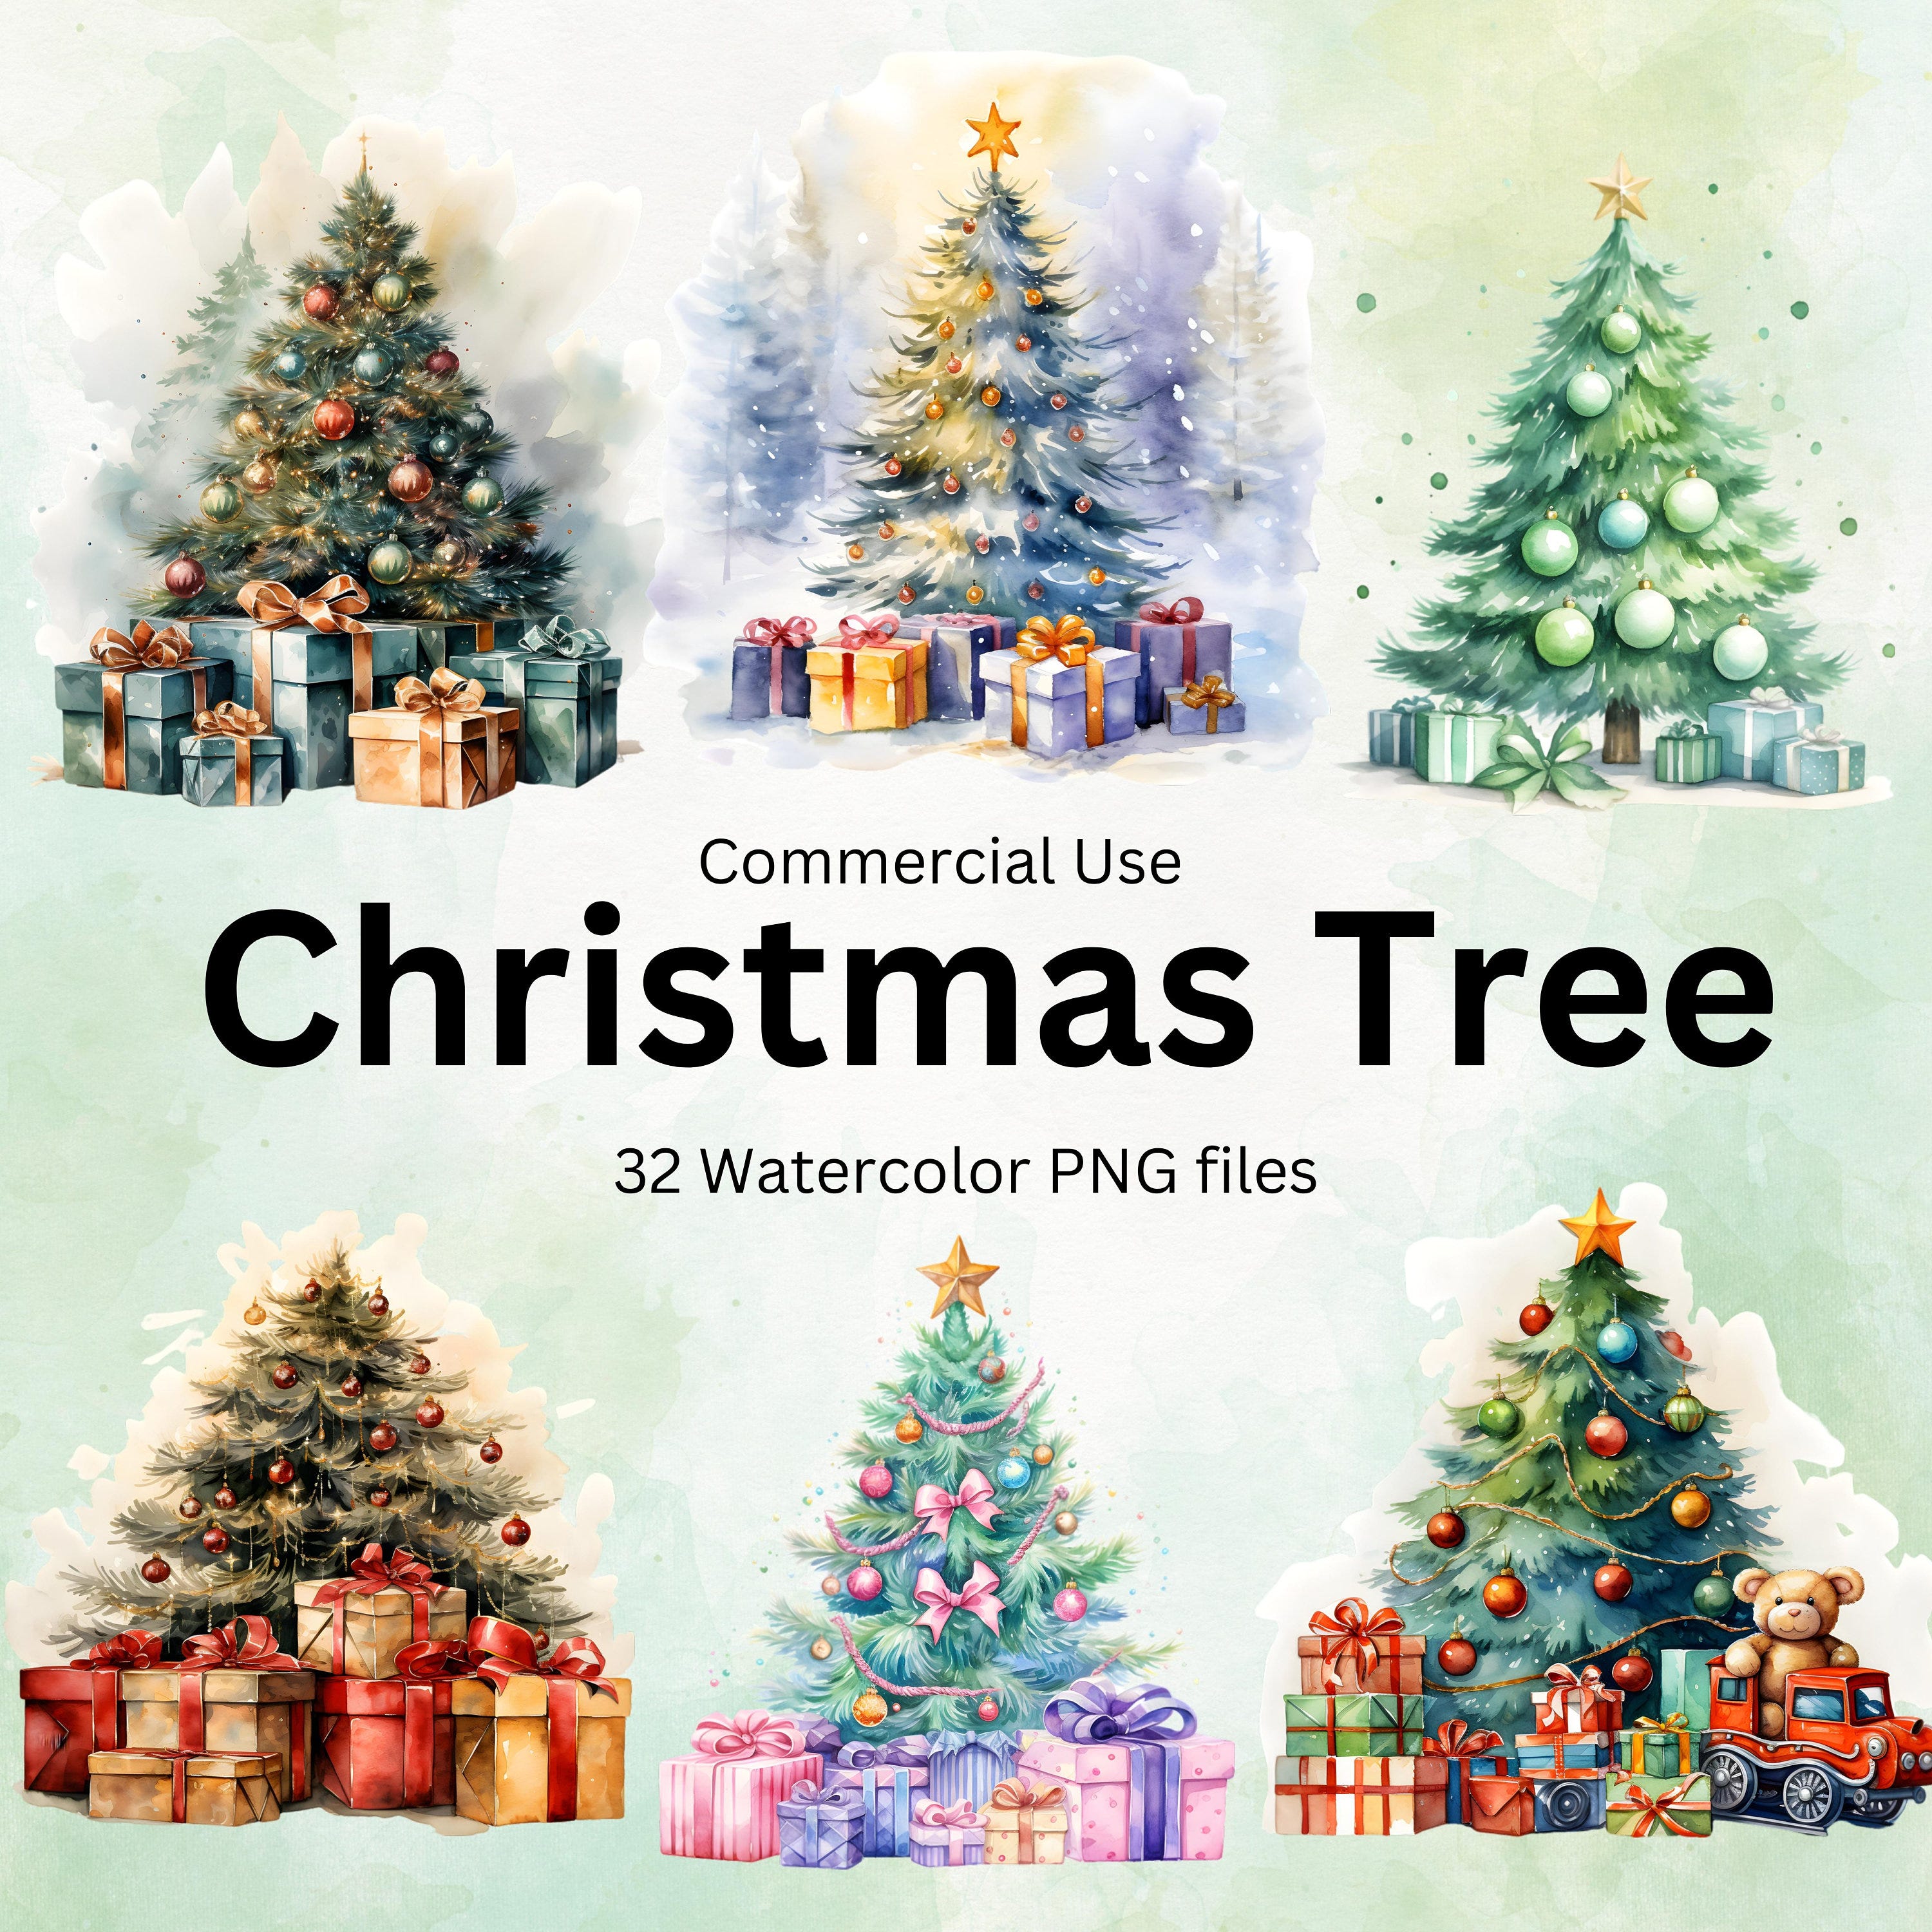 Watercolor Christmas Tree with Presents Clipart Bundle,  32 High Quality Transparent Watercolor PNGs, Card Making, Journaling, Scrapbook